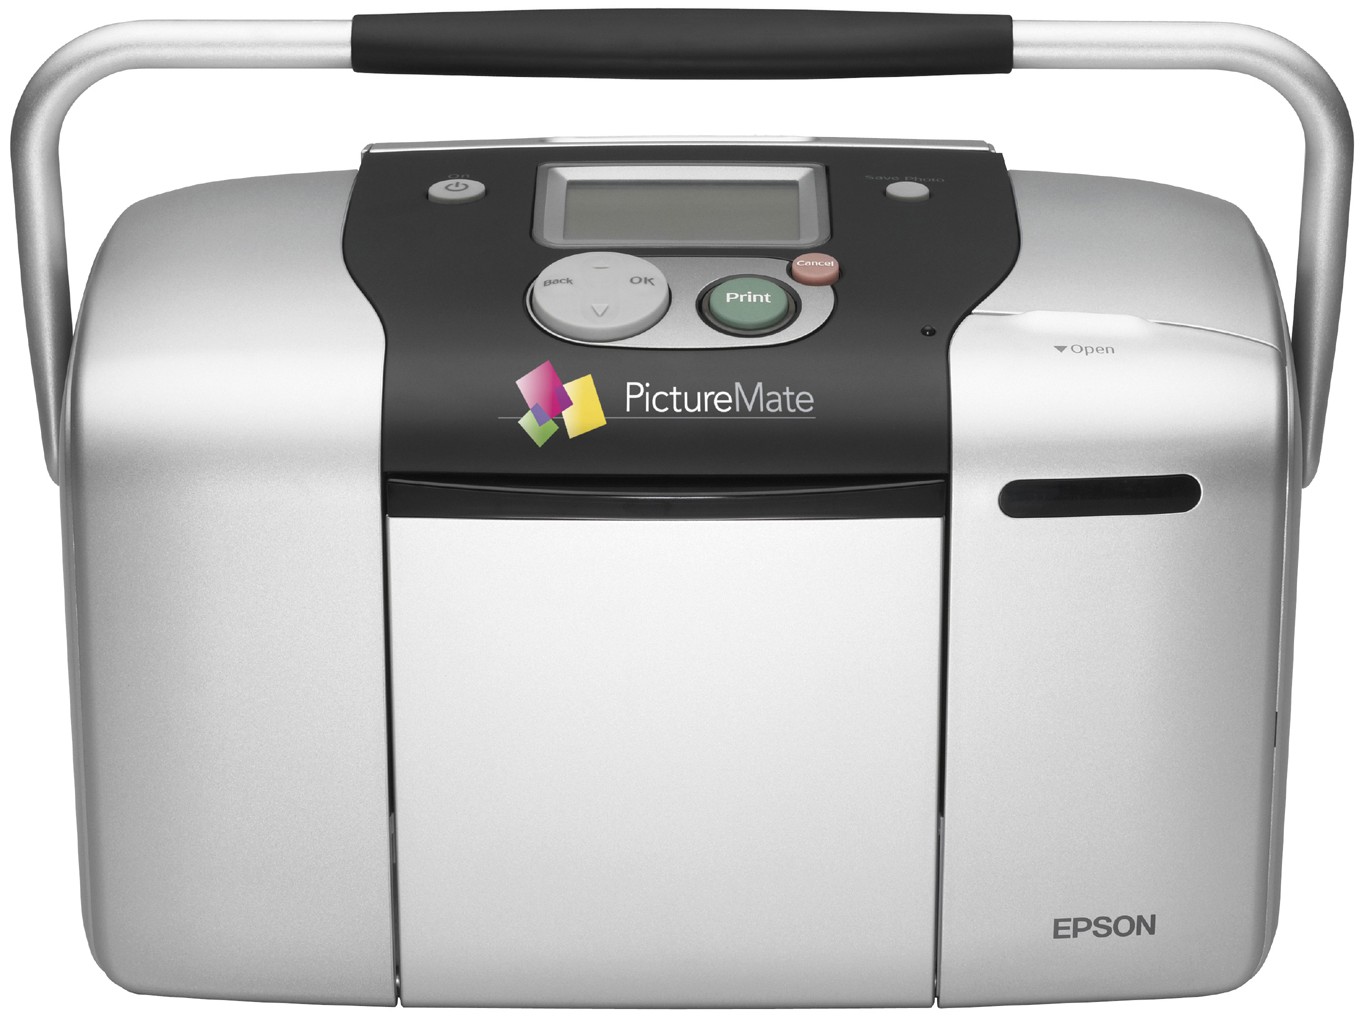 Step-by-step Driver Epson Printer Picturemate Zorin OS Installation - Featured